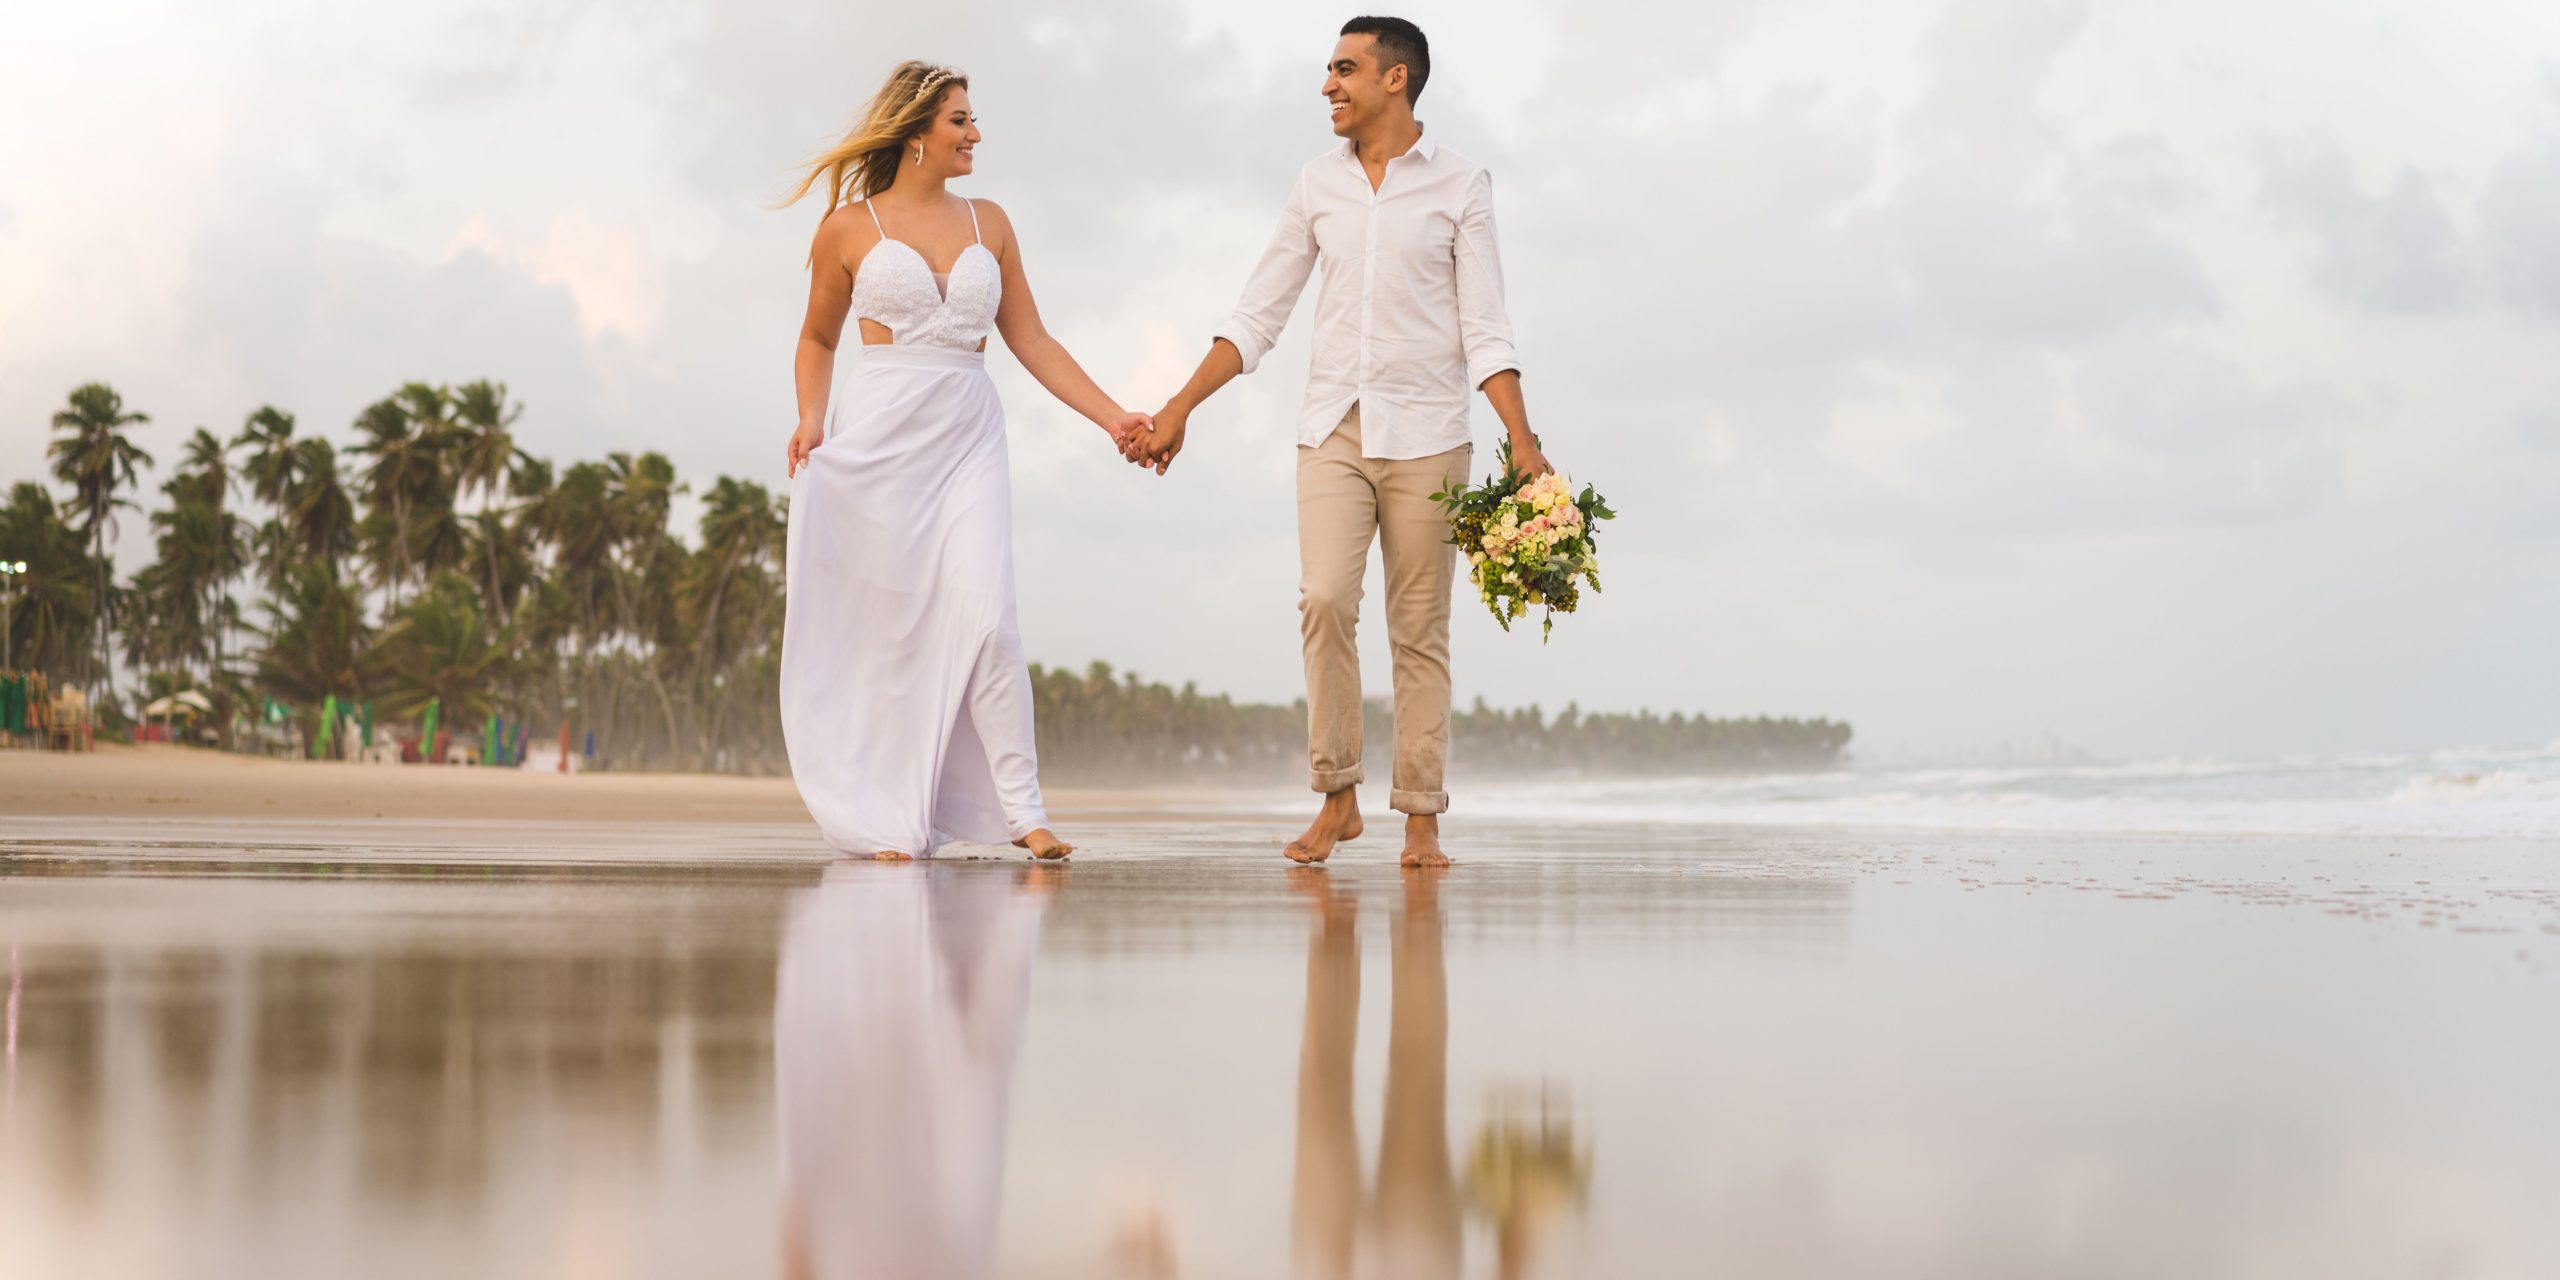 Top Tips For Destination Weddings In Hot Countries